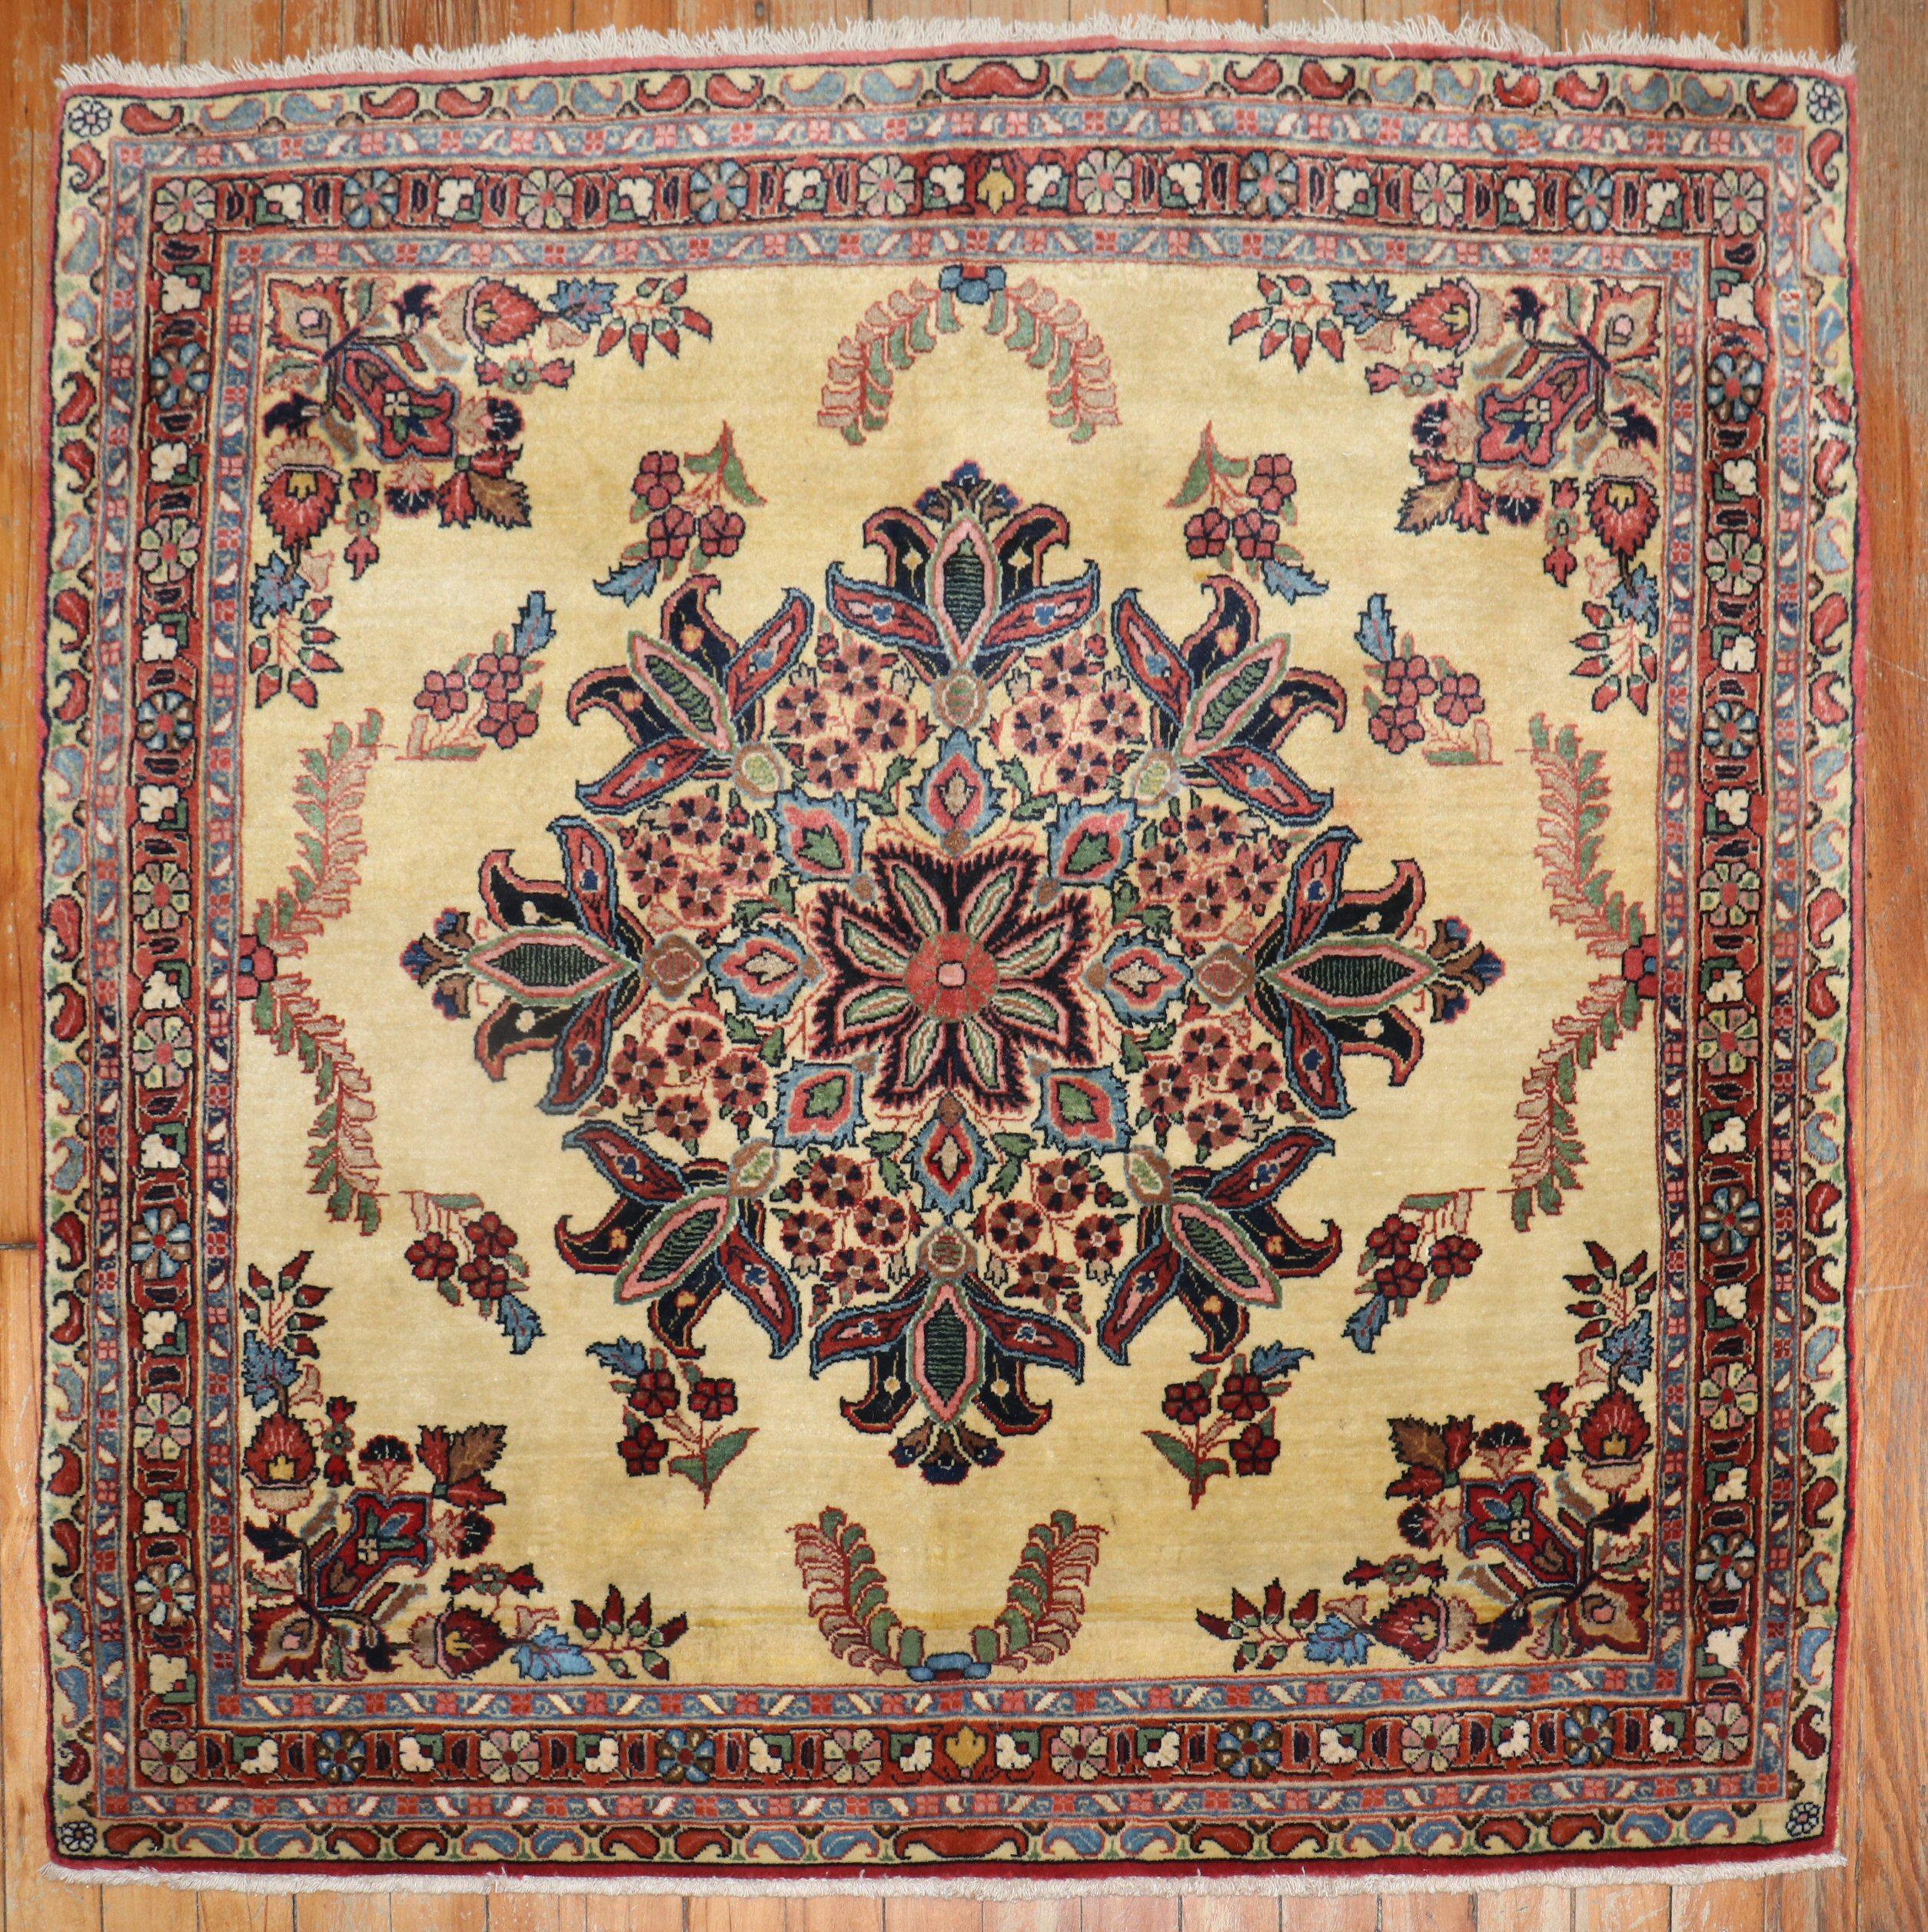 An authentic early 20th-century small square size ornate Sarouk carpet with traditional formal design in rare square size.

Measures: 3'3